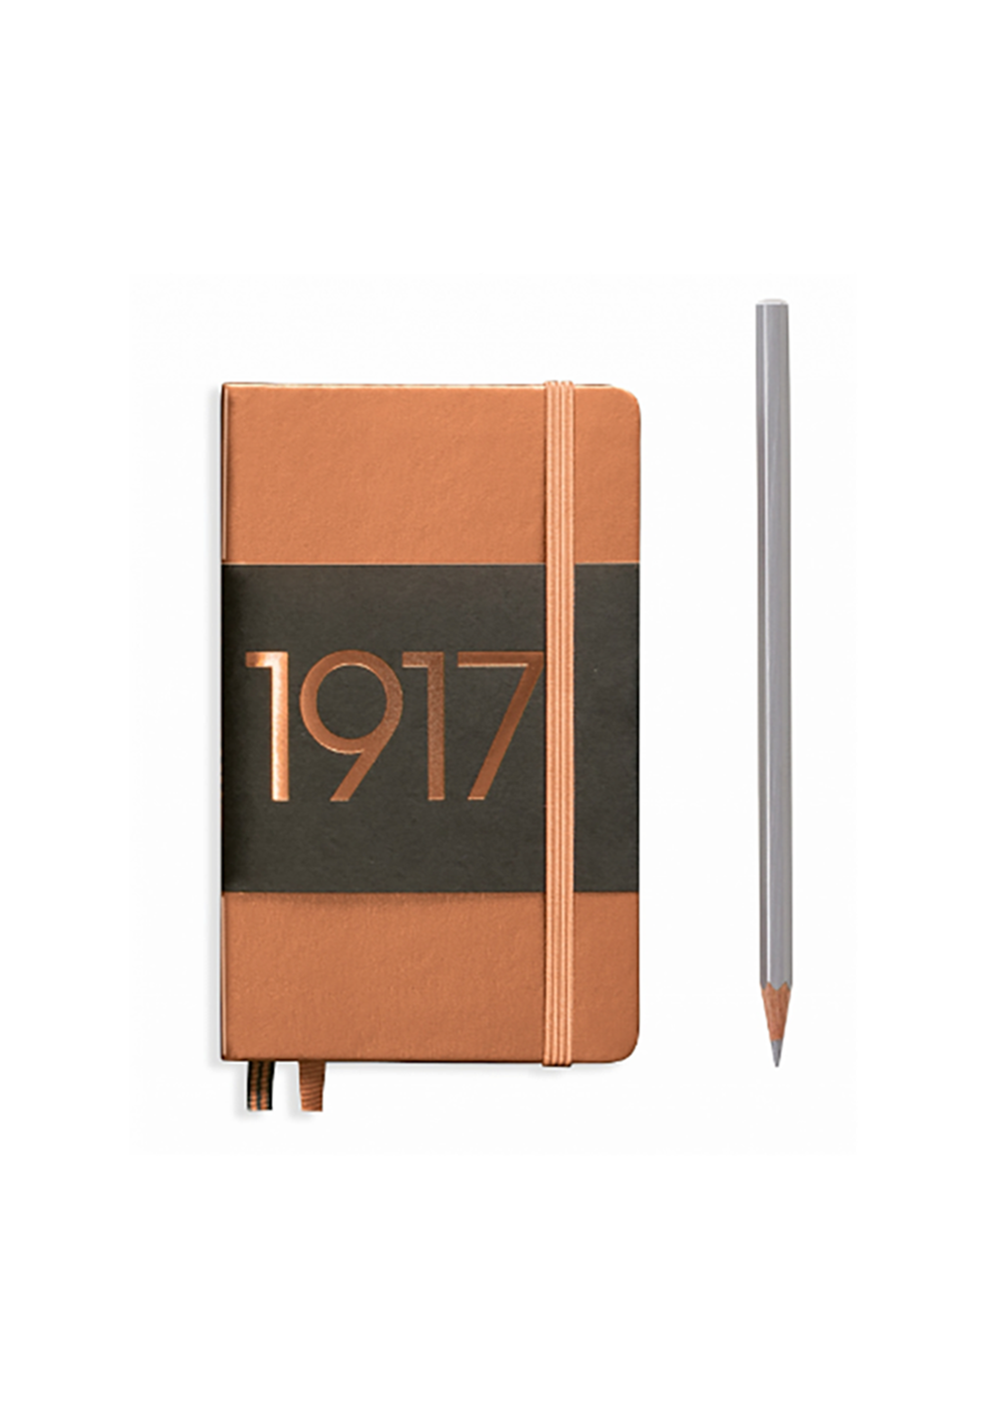 Copper A6 Pocket Notebook - Ruled